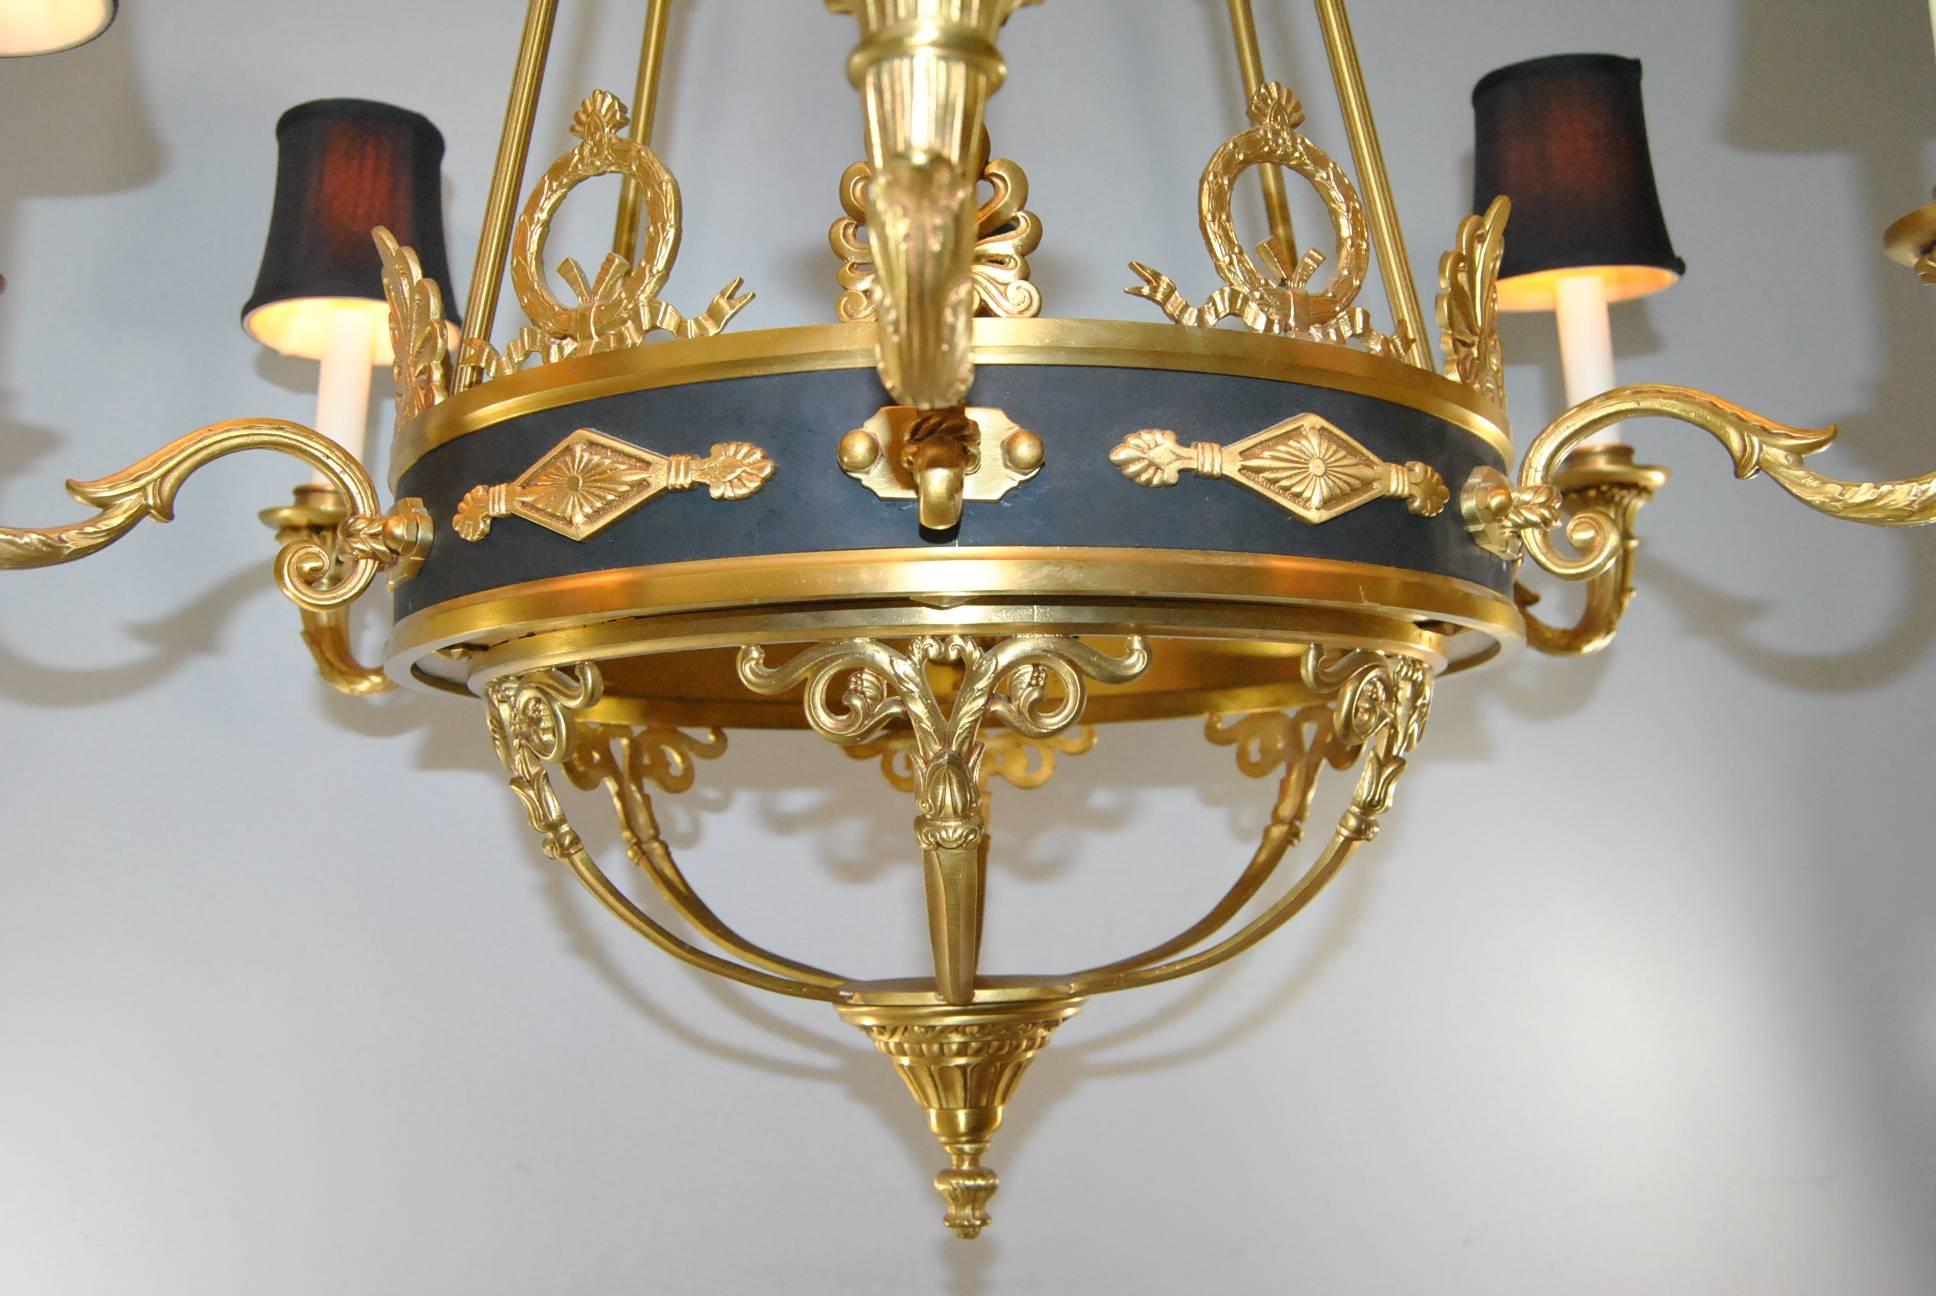 A beautiful French Empire style six-arm bronze chandelier with black tole accents. This chandelier has an open bird cage bottom with central finial. Great dore detail adorns the black body of the chandelier. The top crown is large acanthus leaf and